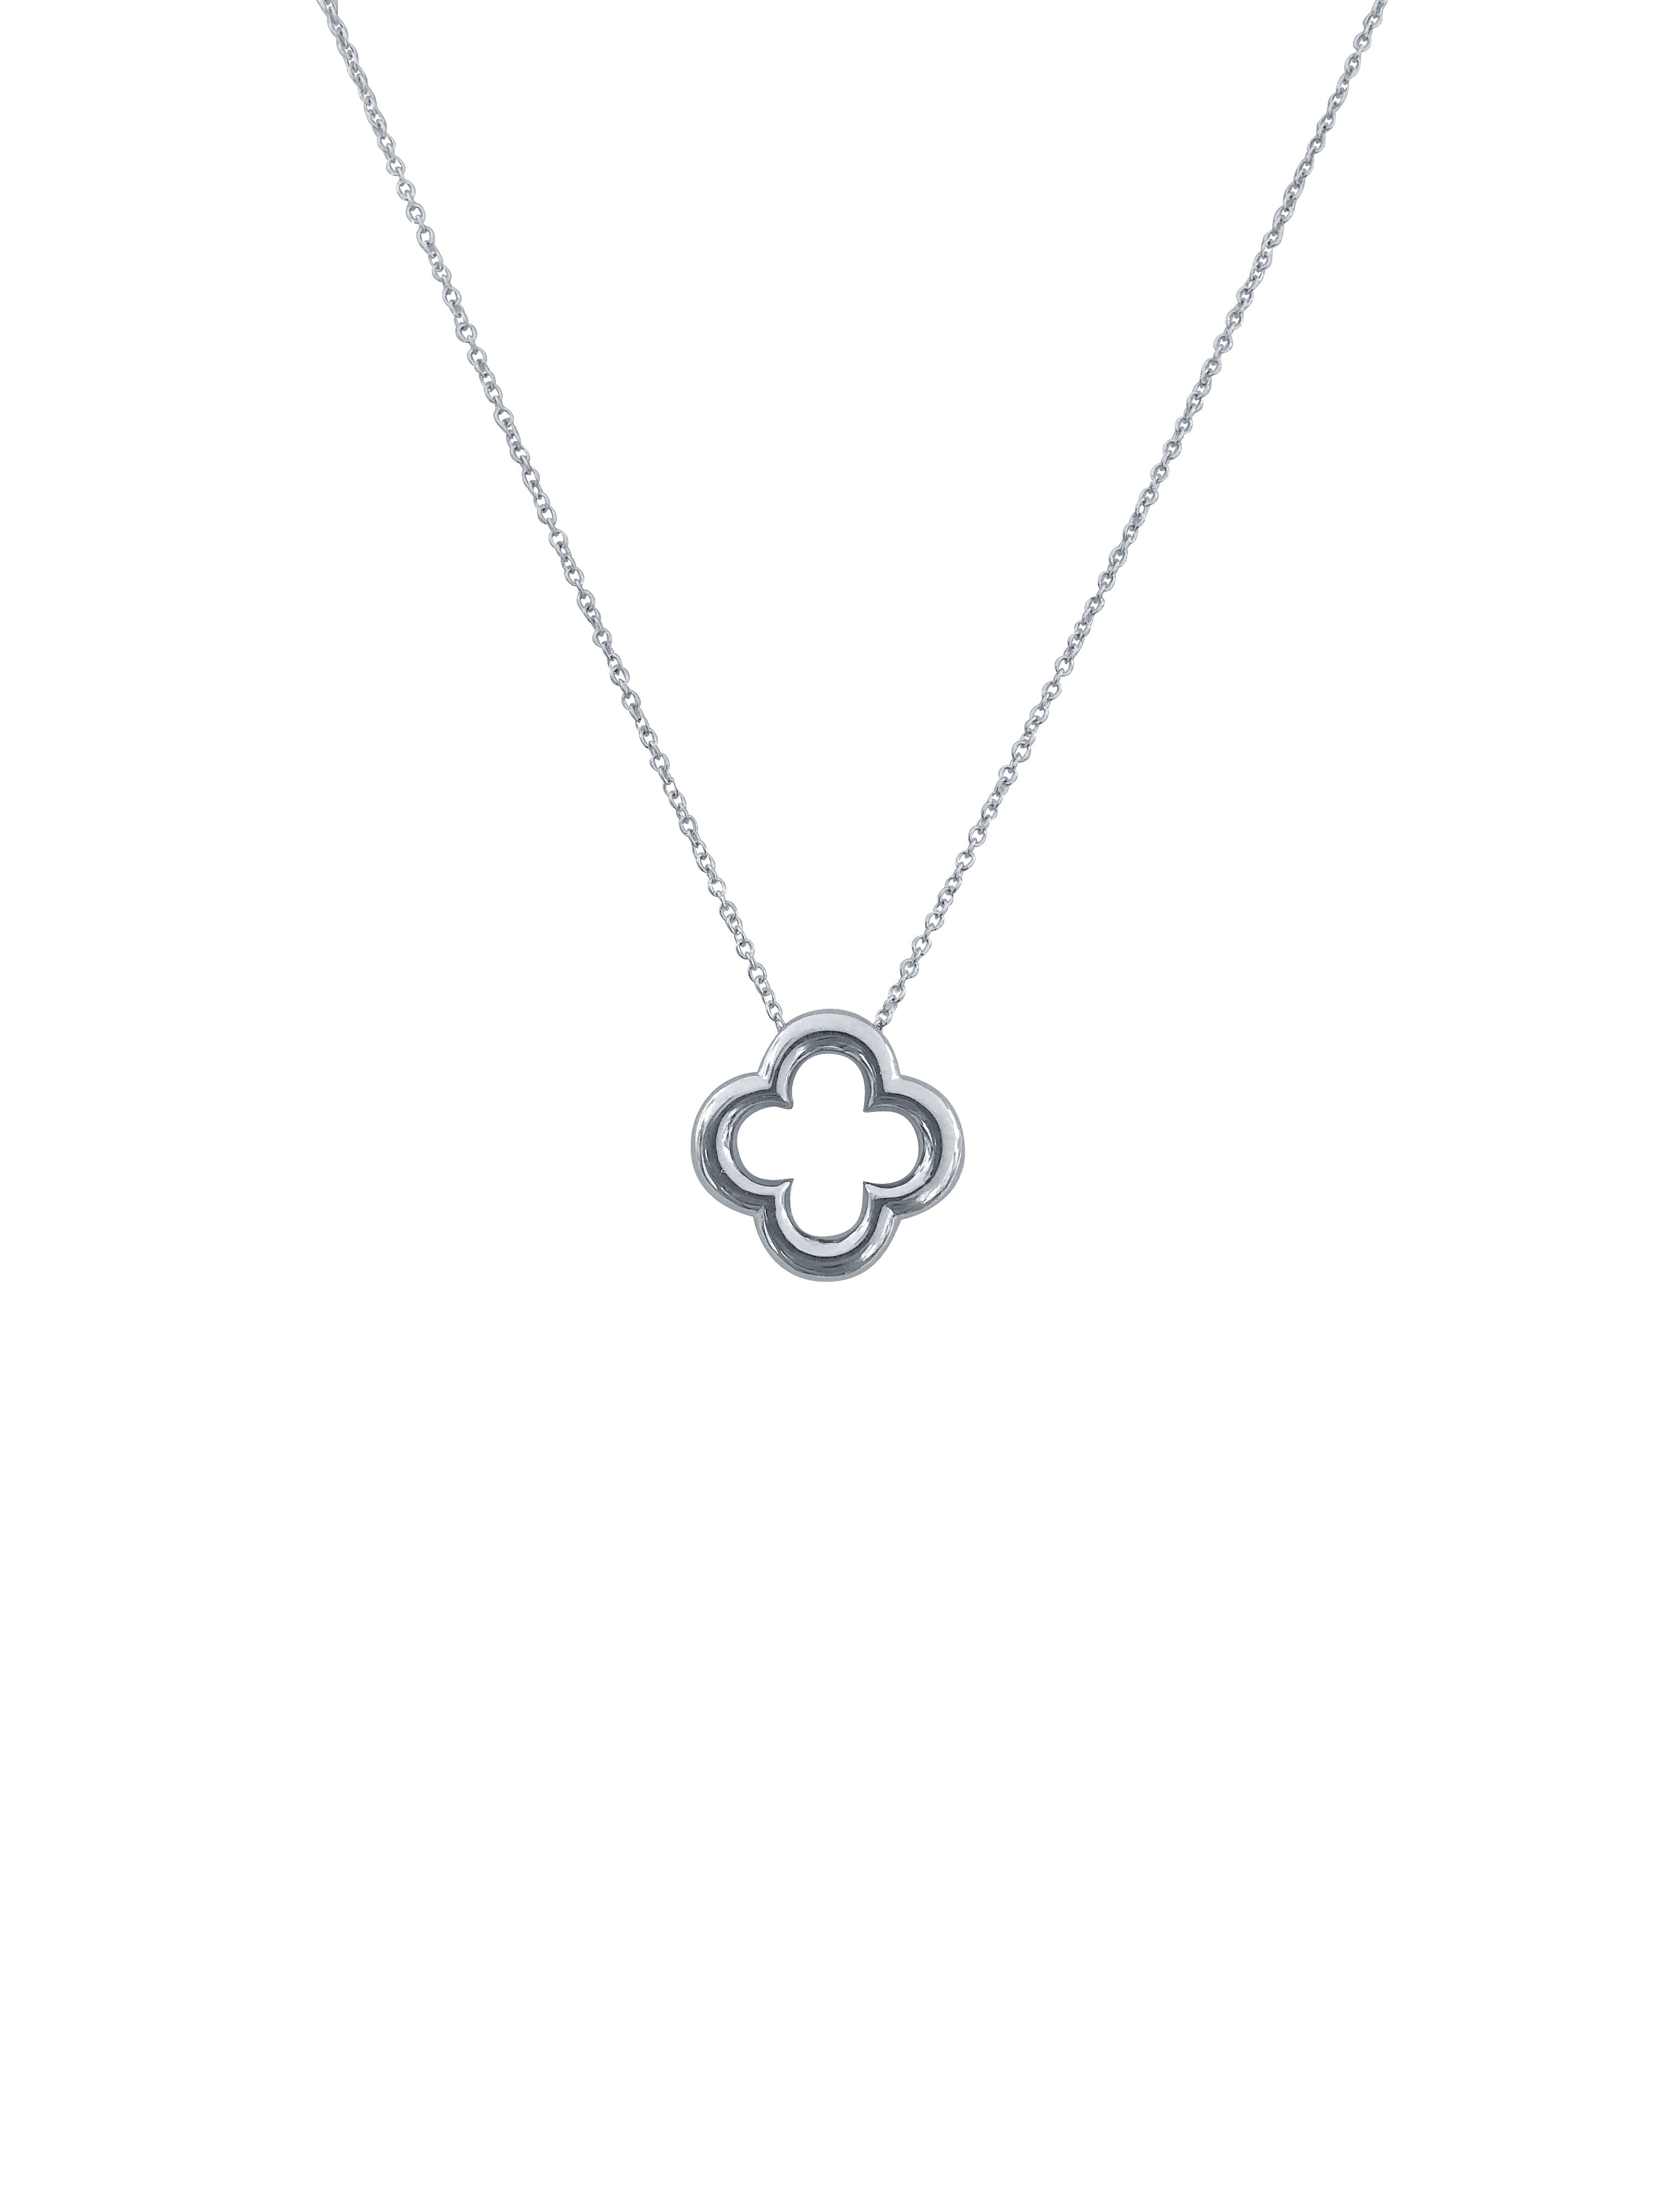 14KW Clover Necklace